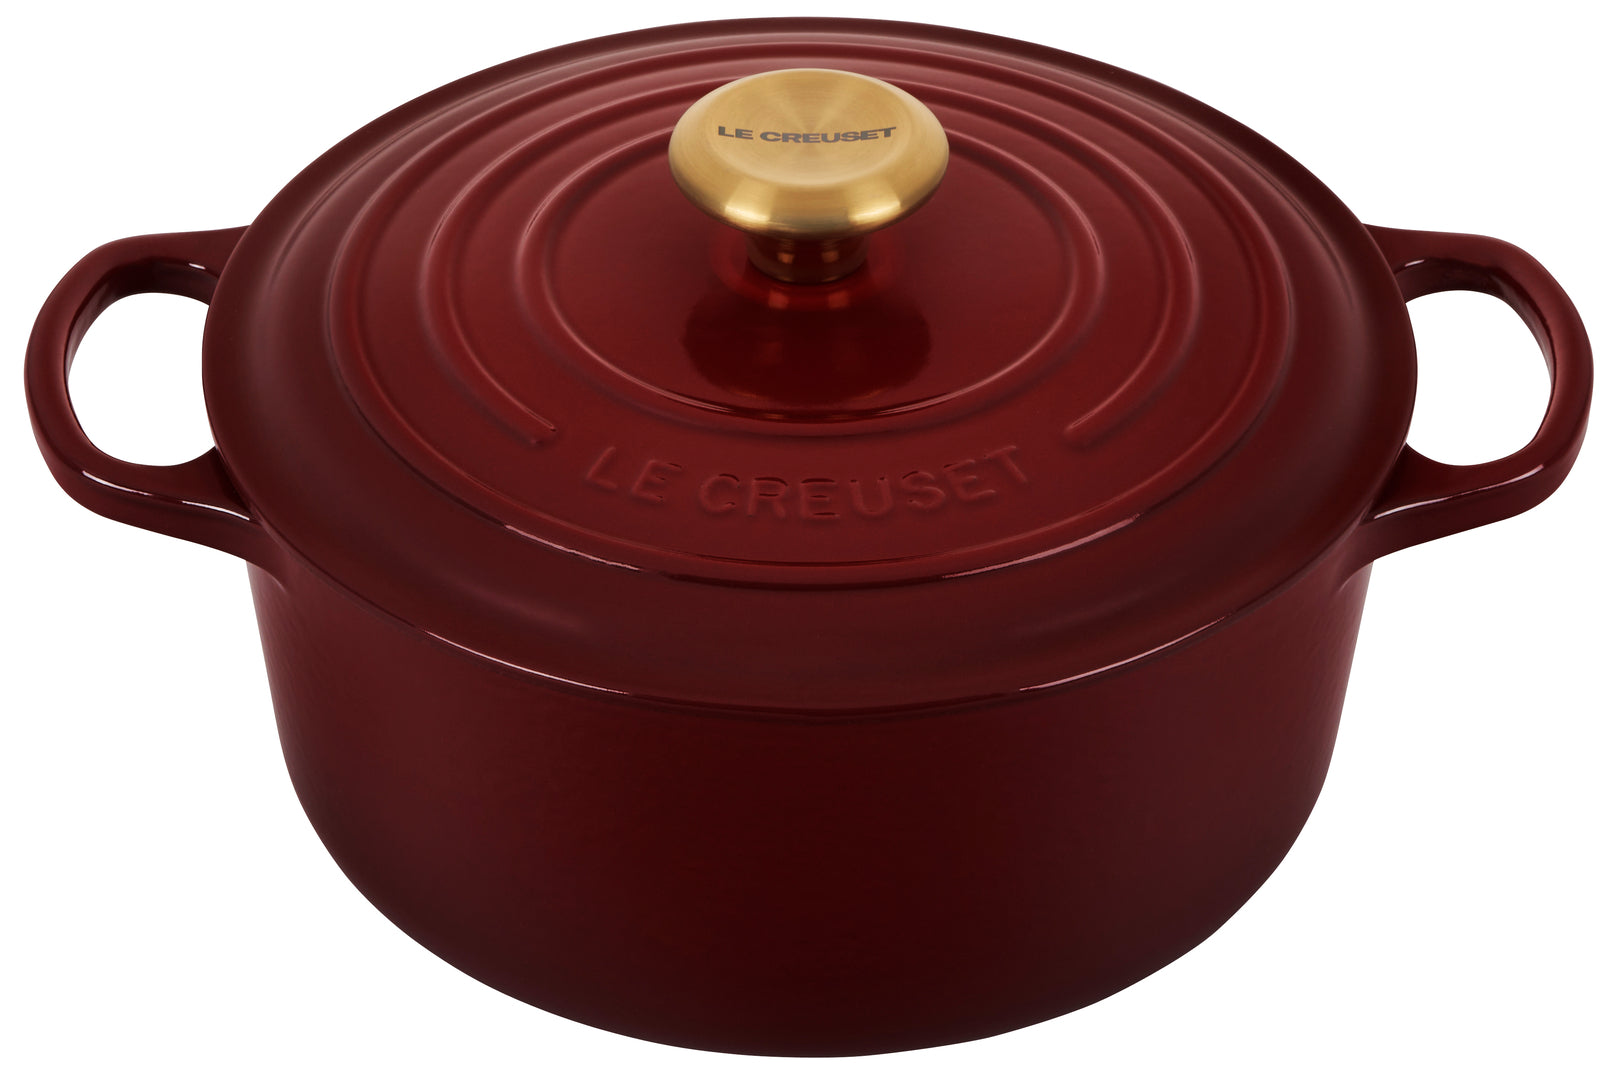 The Le Creuset Braiser Is the Unsung Hero of Thanksgiving